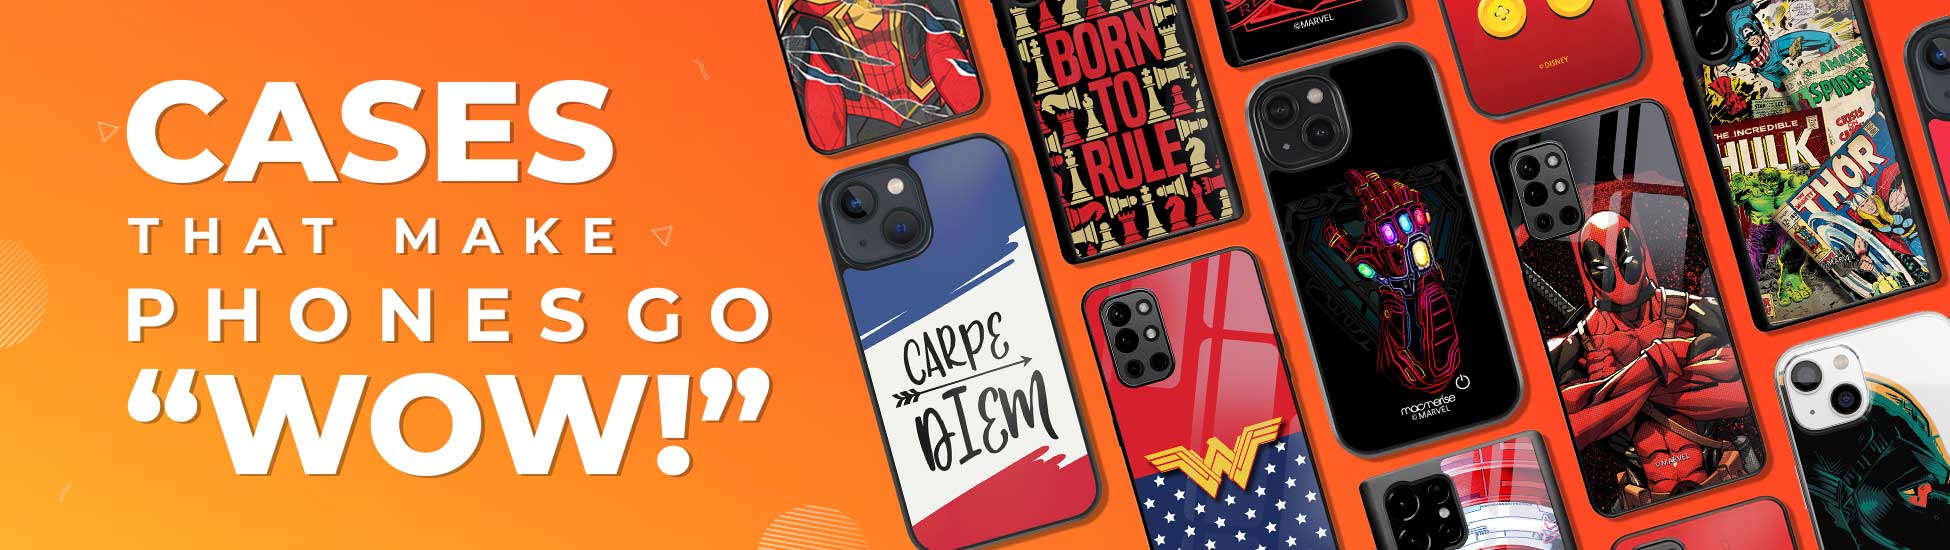 Macmerise Phone Cases and Covers